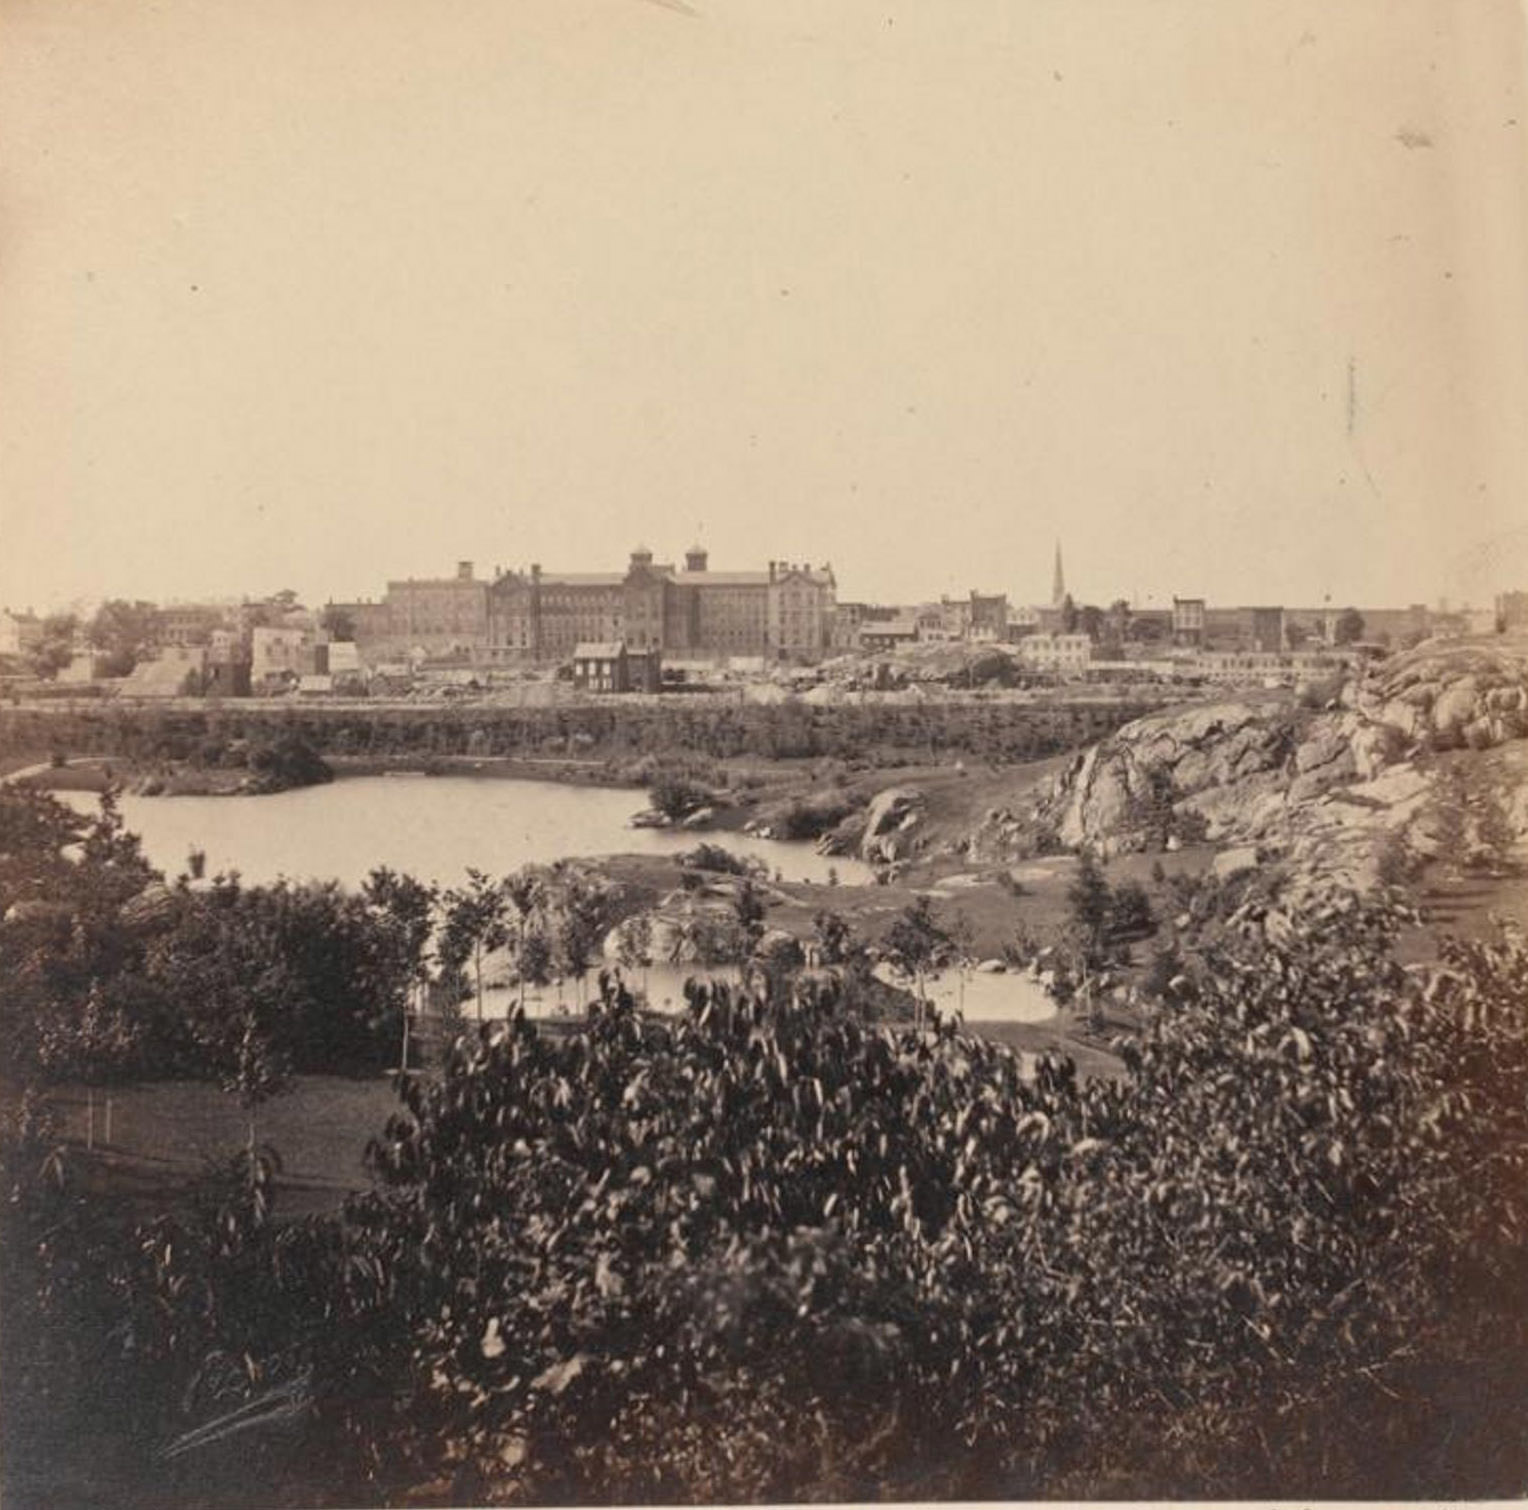 View Of Man-Made Lake With Buildings In Distance, 1862